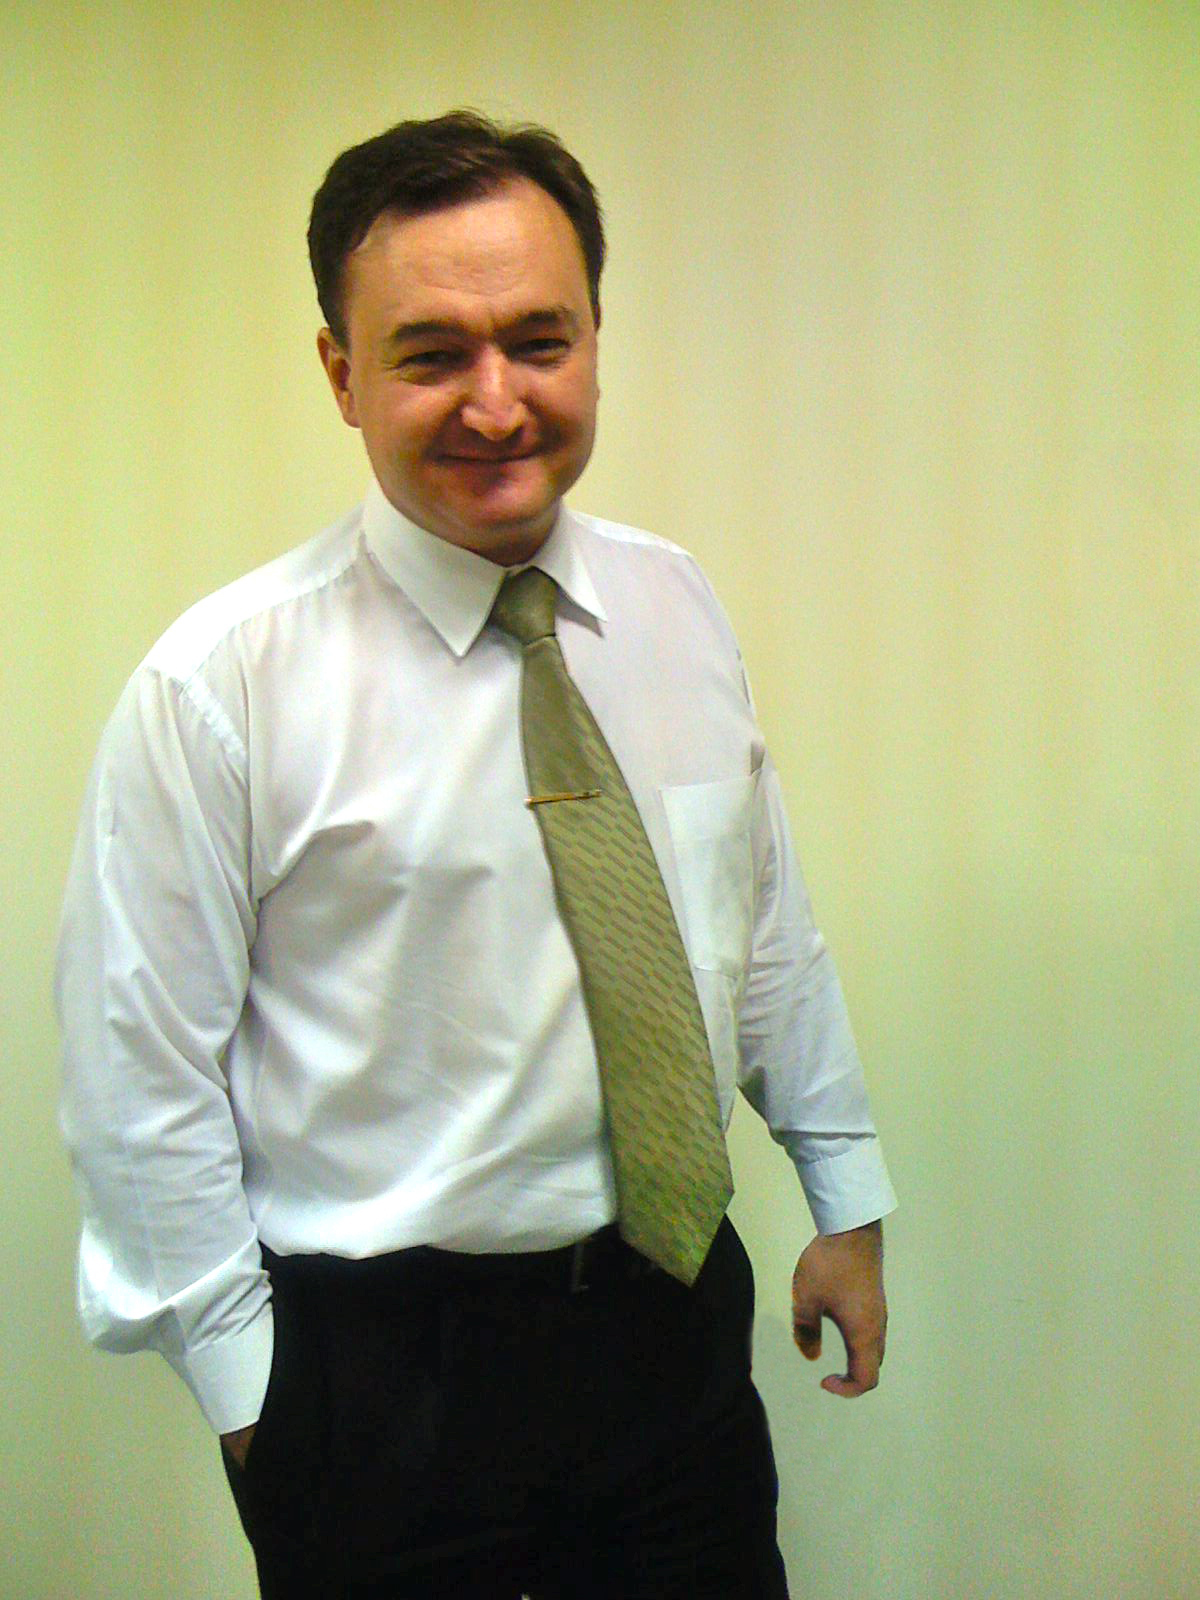 The once happy smile of Sergei Magnitsky. Image taken from billbrowder.com